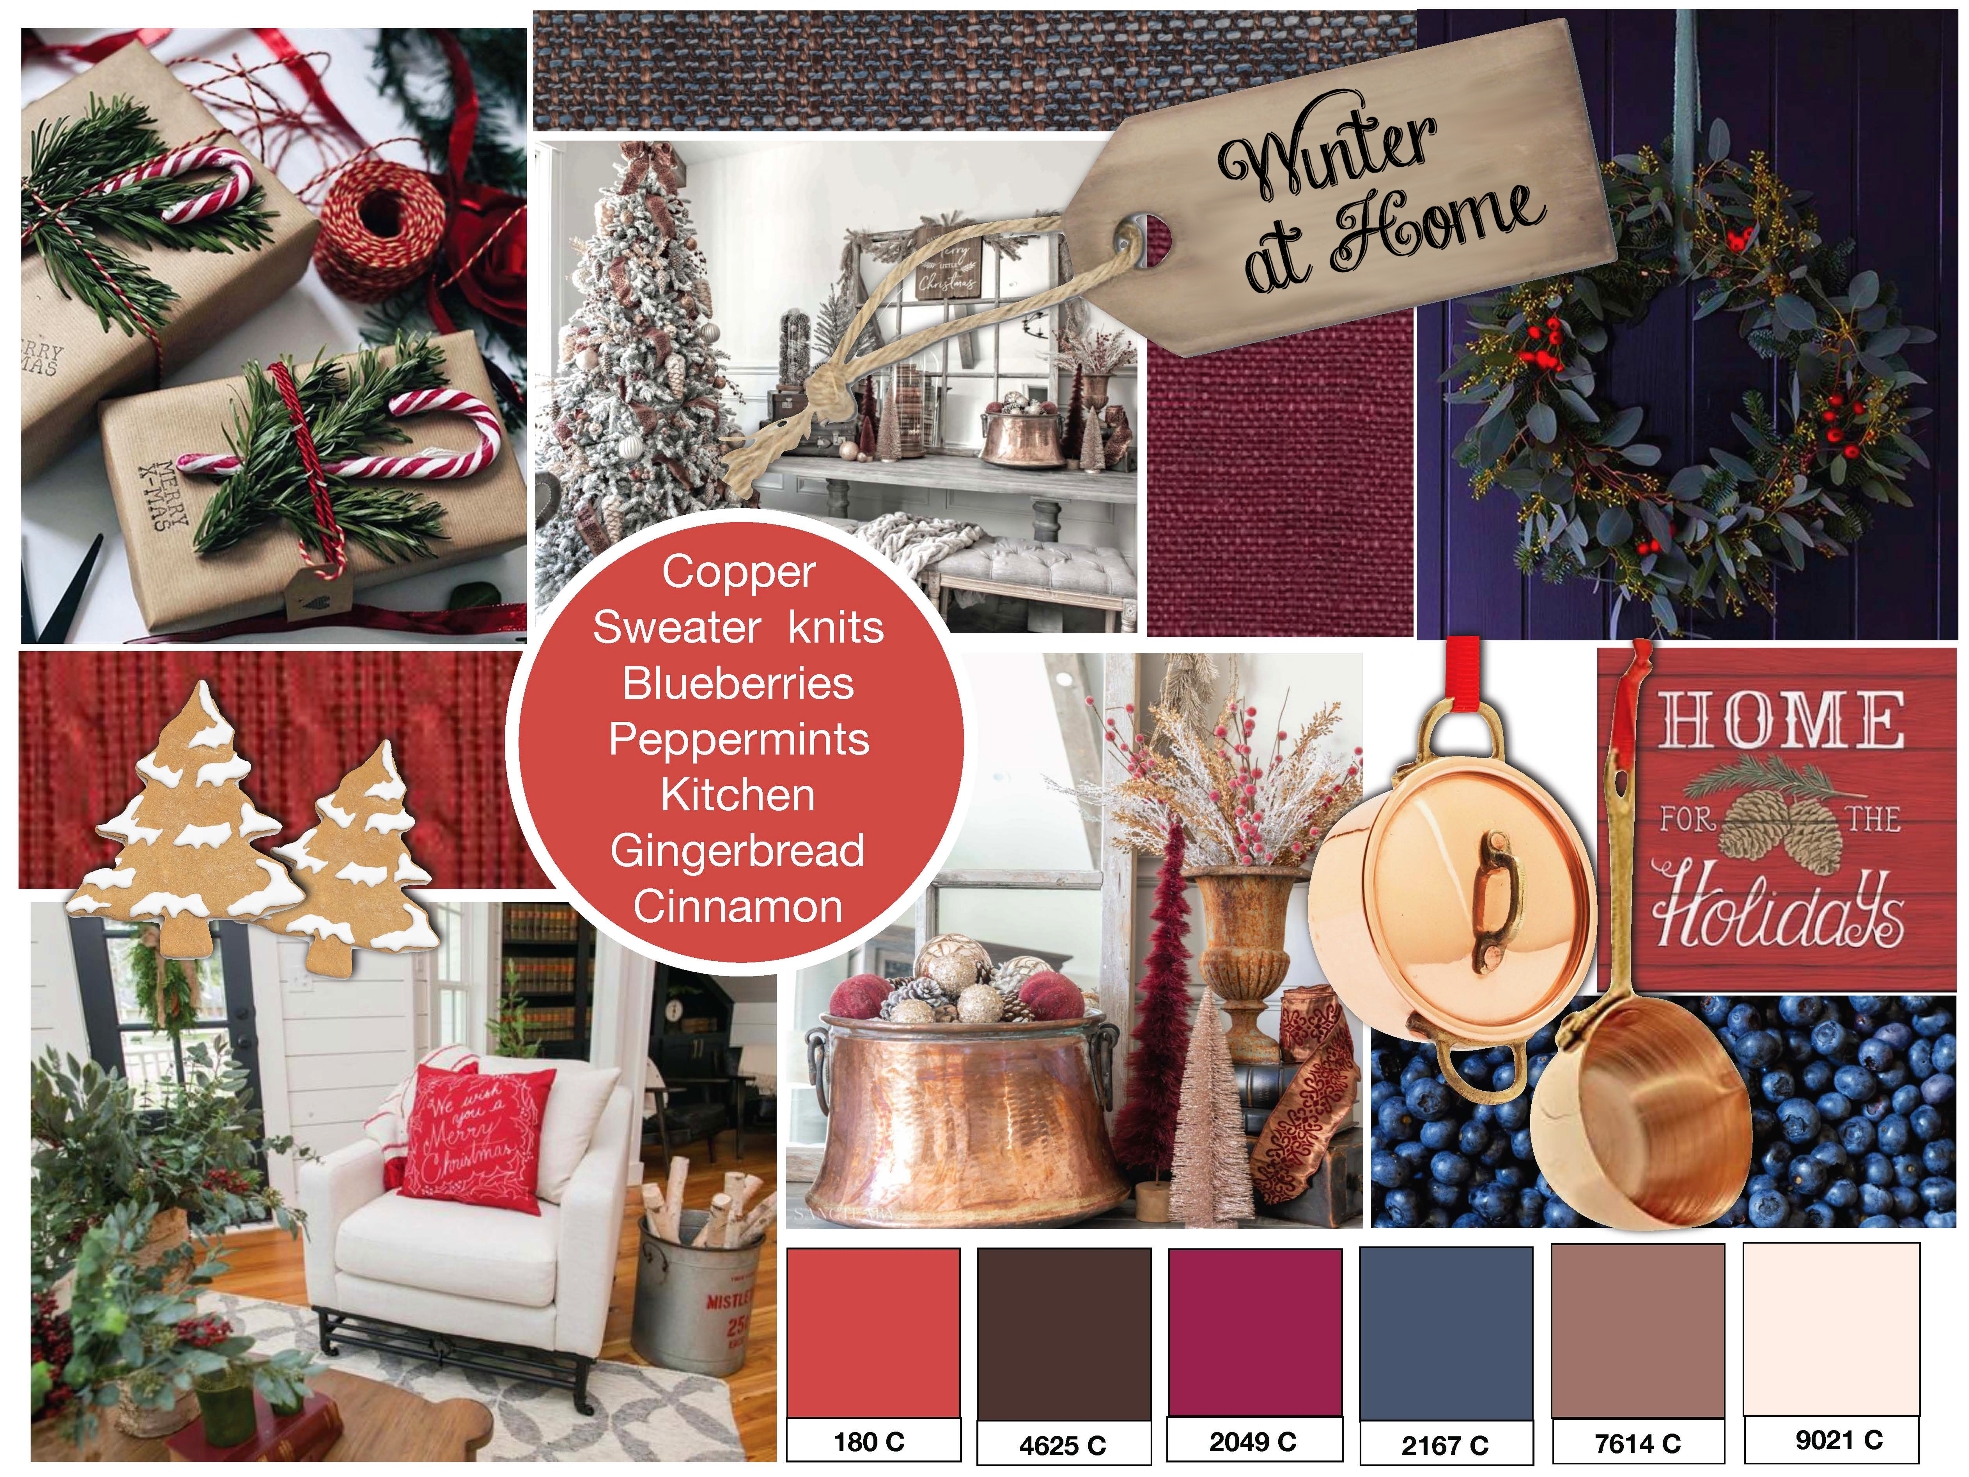 Revealed: The Most Popular Christmas Trends On Pinterest